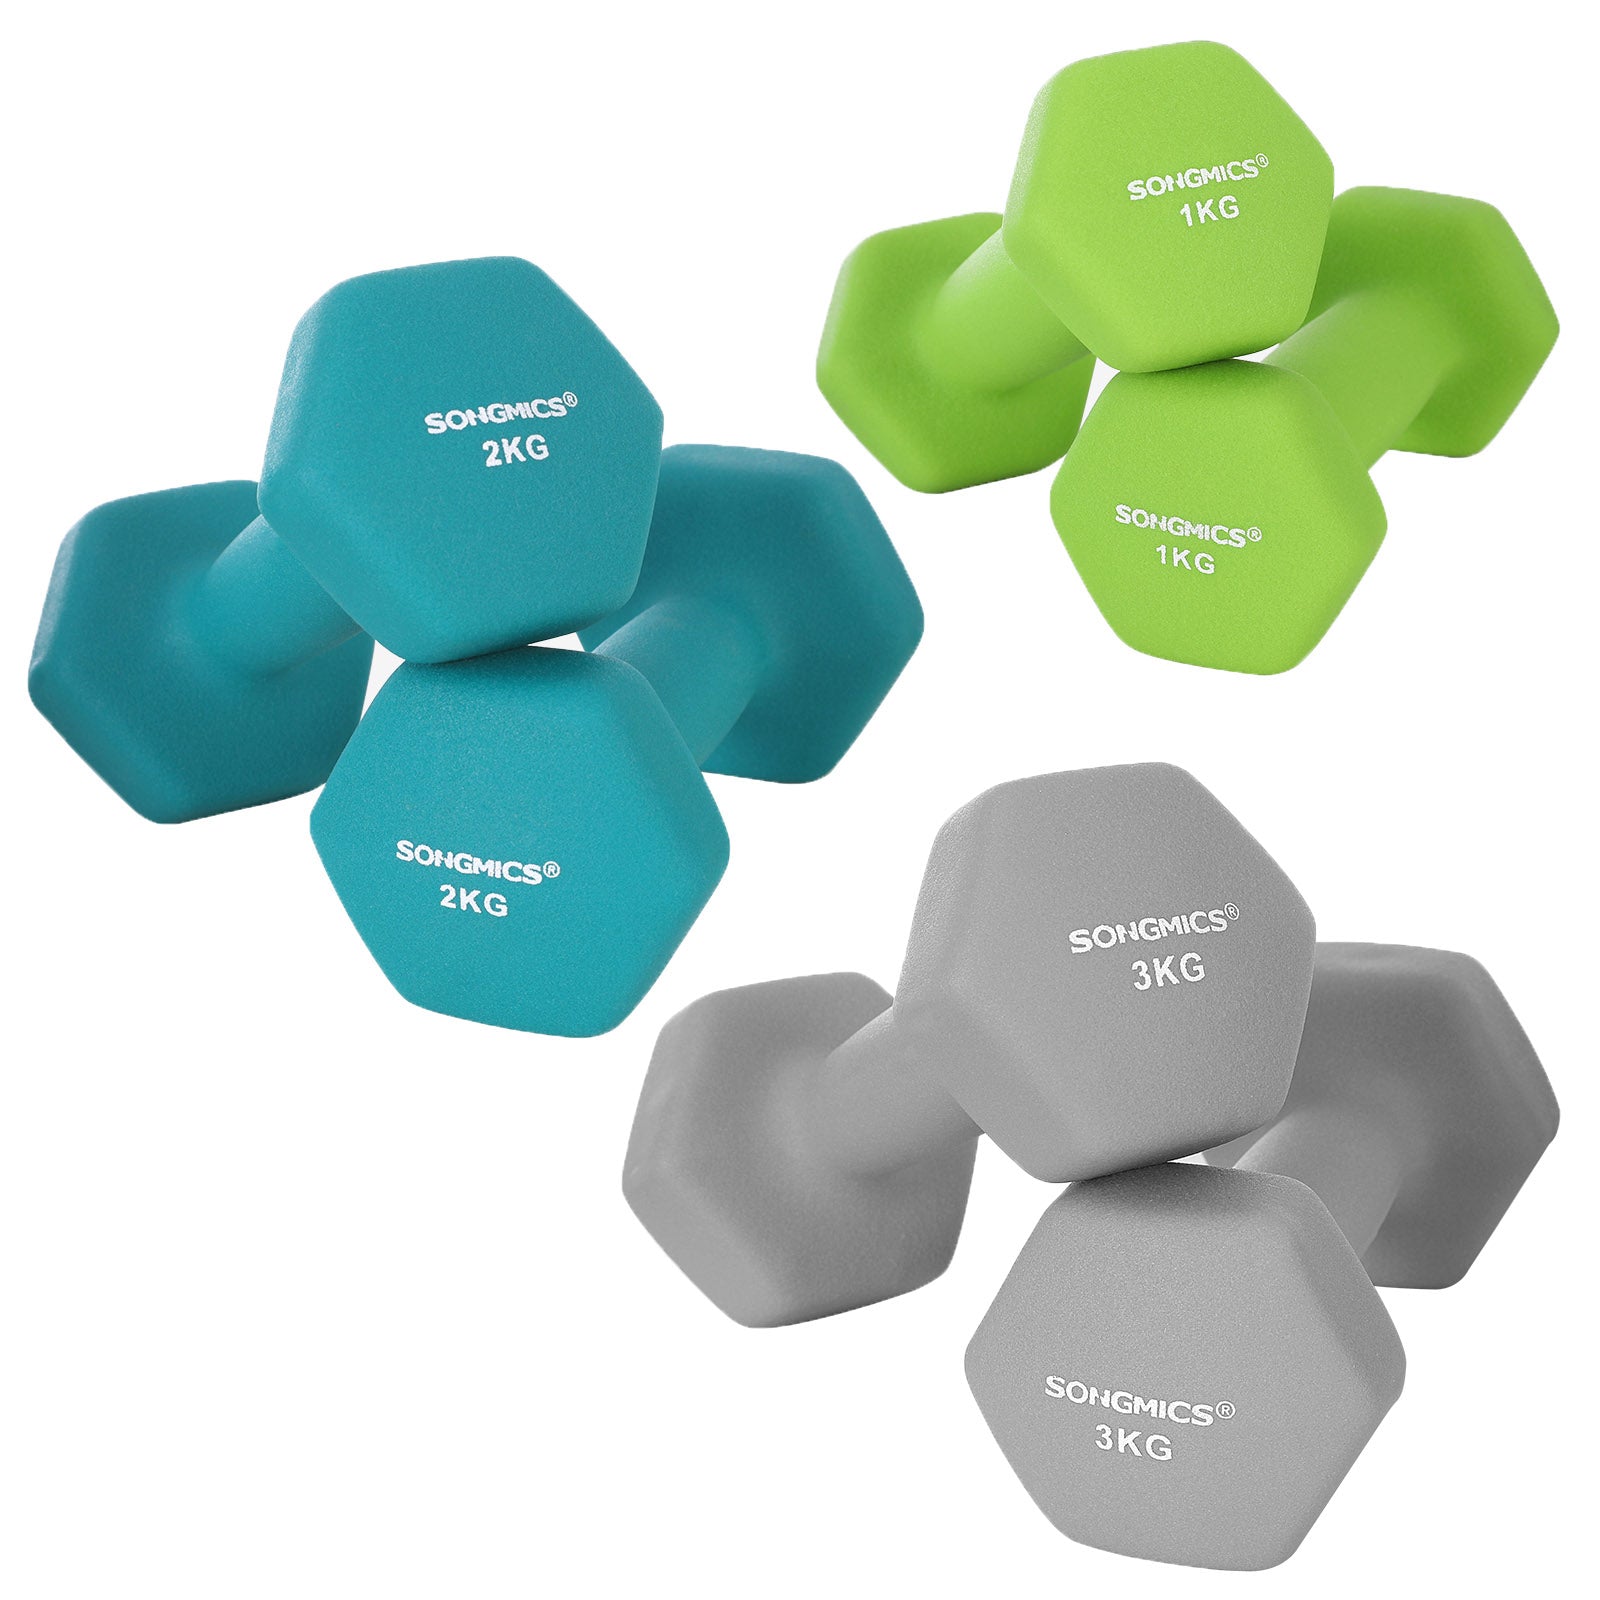 Hex Dumbbells Set with Stand - 2 x 1 kg, 2 x 2 kg, 2 x 3 kg, Lime, Teal and Grey, Neoprene Matte Finish, SONGMICS, 4